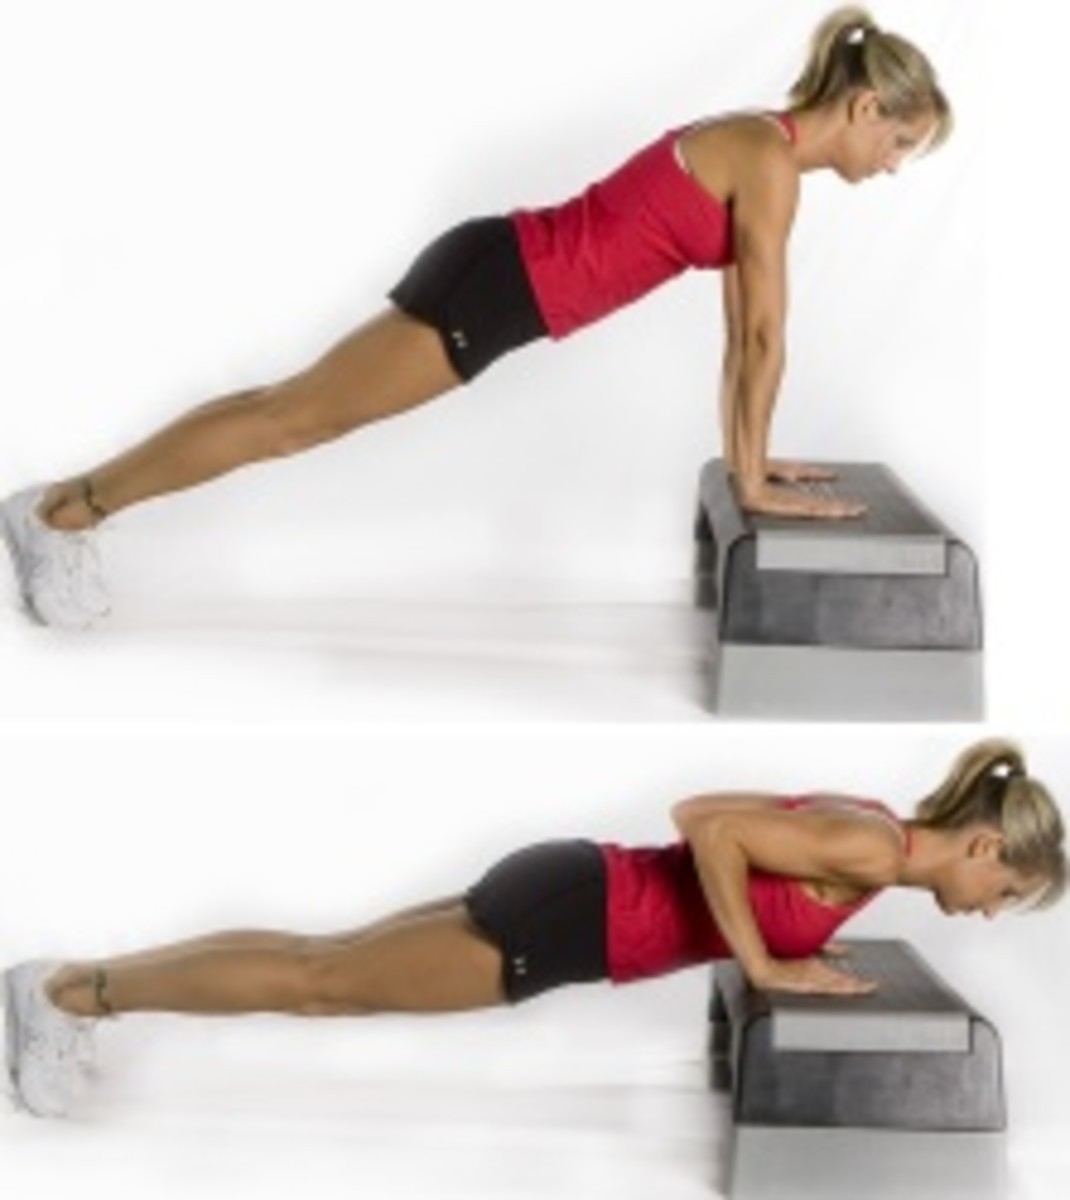 land push ups demonstration with blond girl in red top and black short using a silver block for added resistance